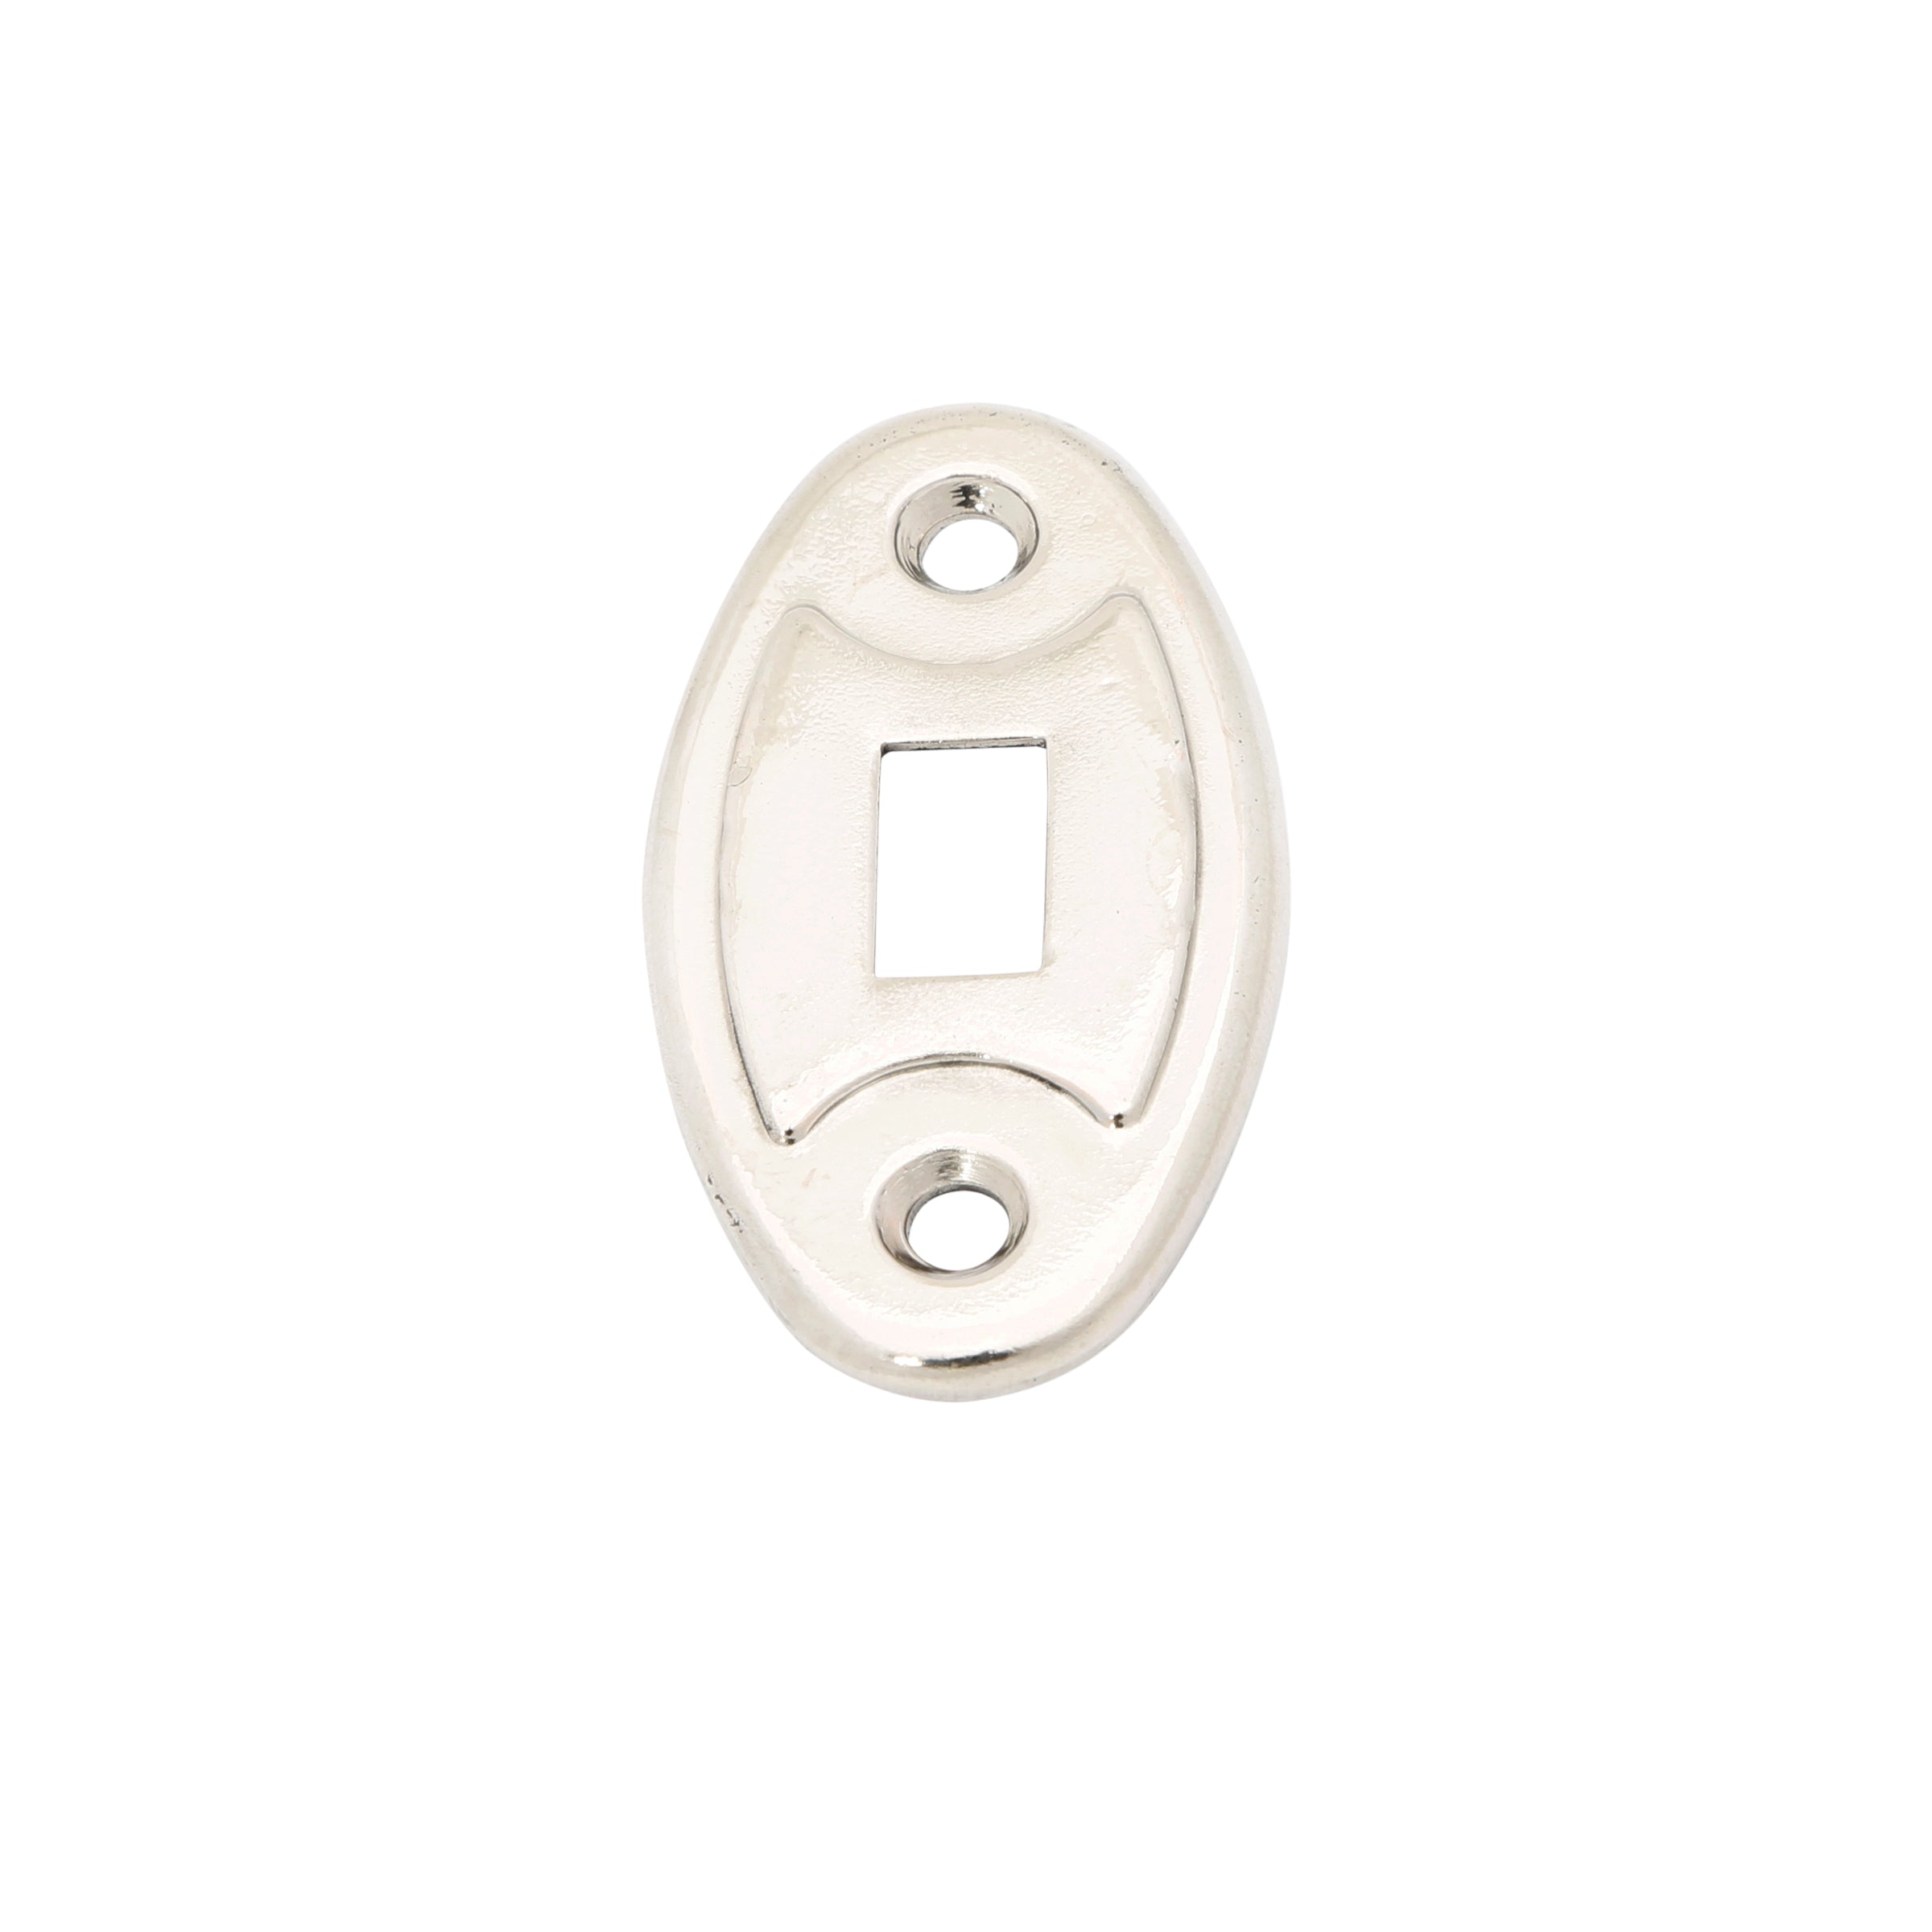 Dome Light Switch Plate • 1928-31 Model A Ford